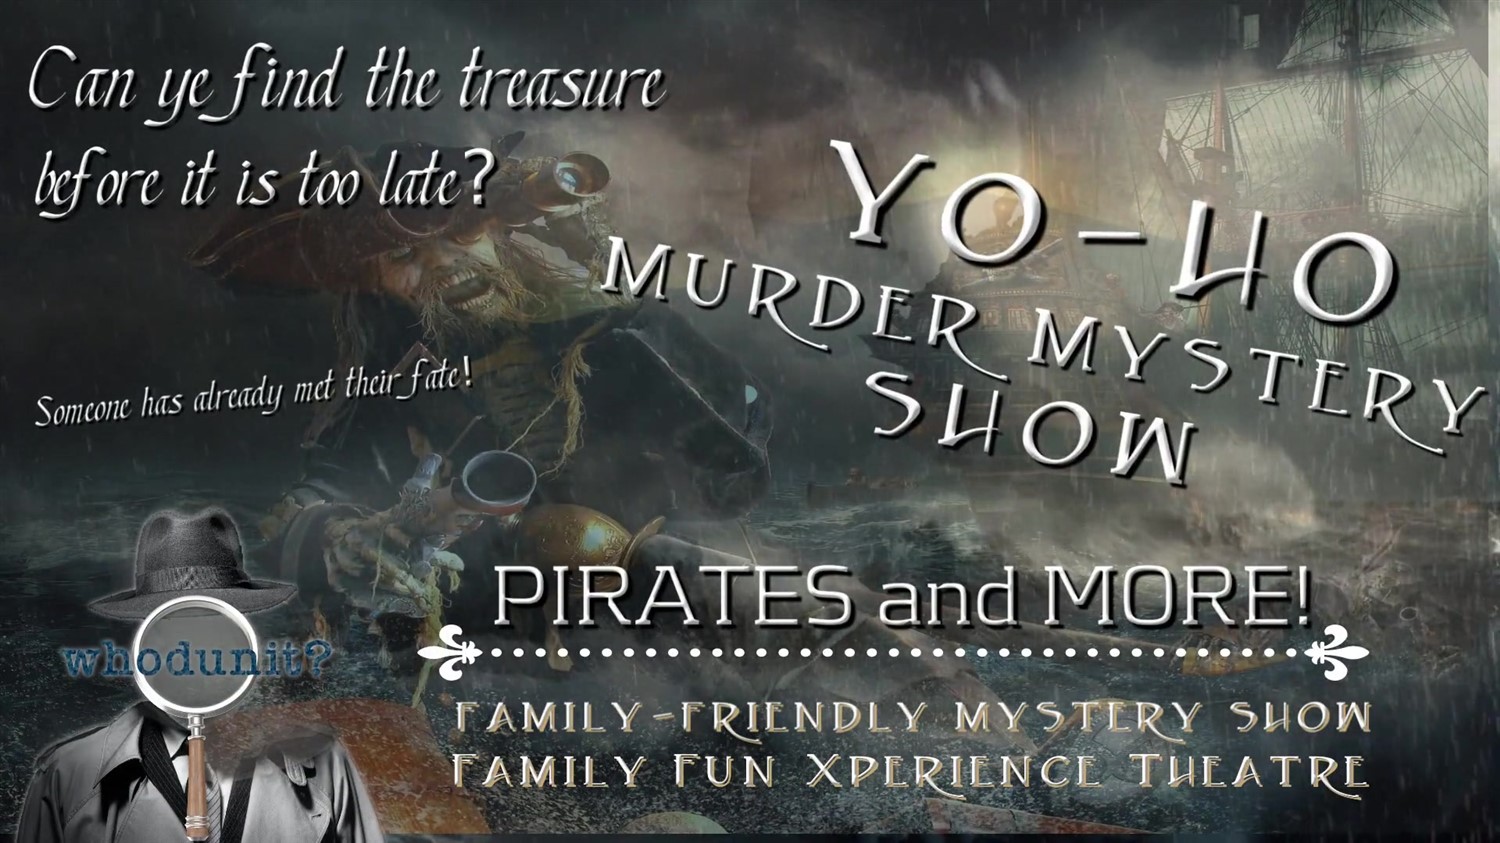 Whodunit? YO HO PIRATE ISLAND Murder Mystery + Game Show on Jul 06, 19:00@FFX Theatre - Pick a seat, Buy tickets and Get information on Family Fun Xperience tickets.ffxshow.org